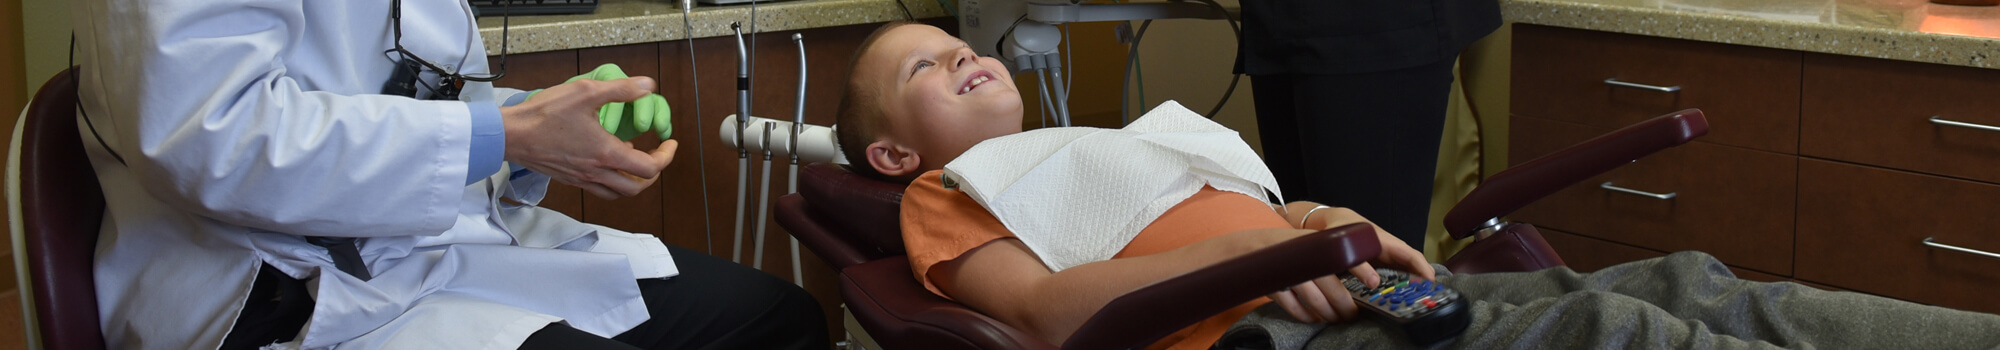 Family dental care that makes everyone smile